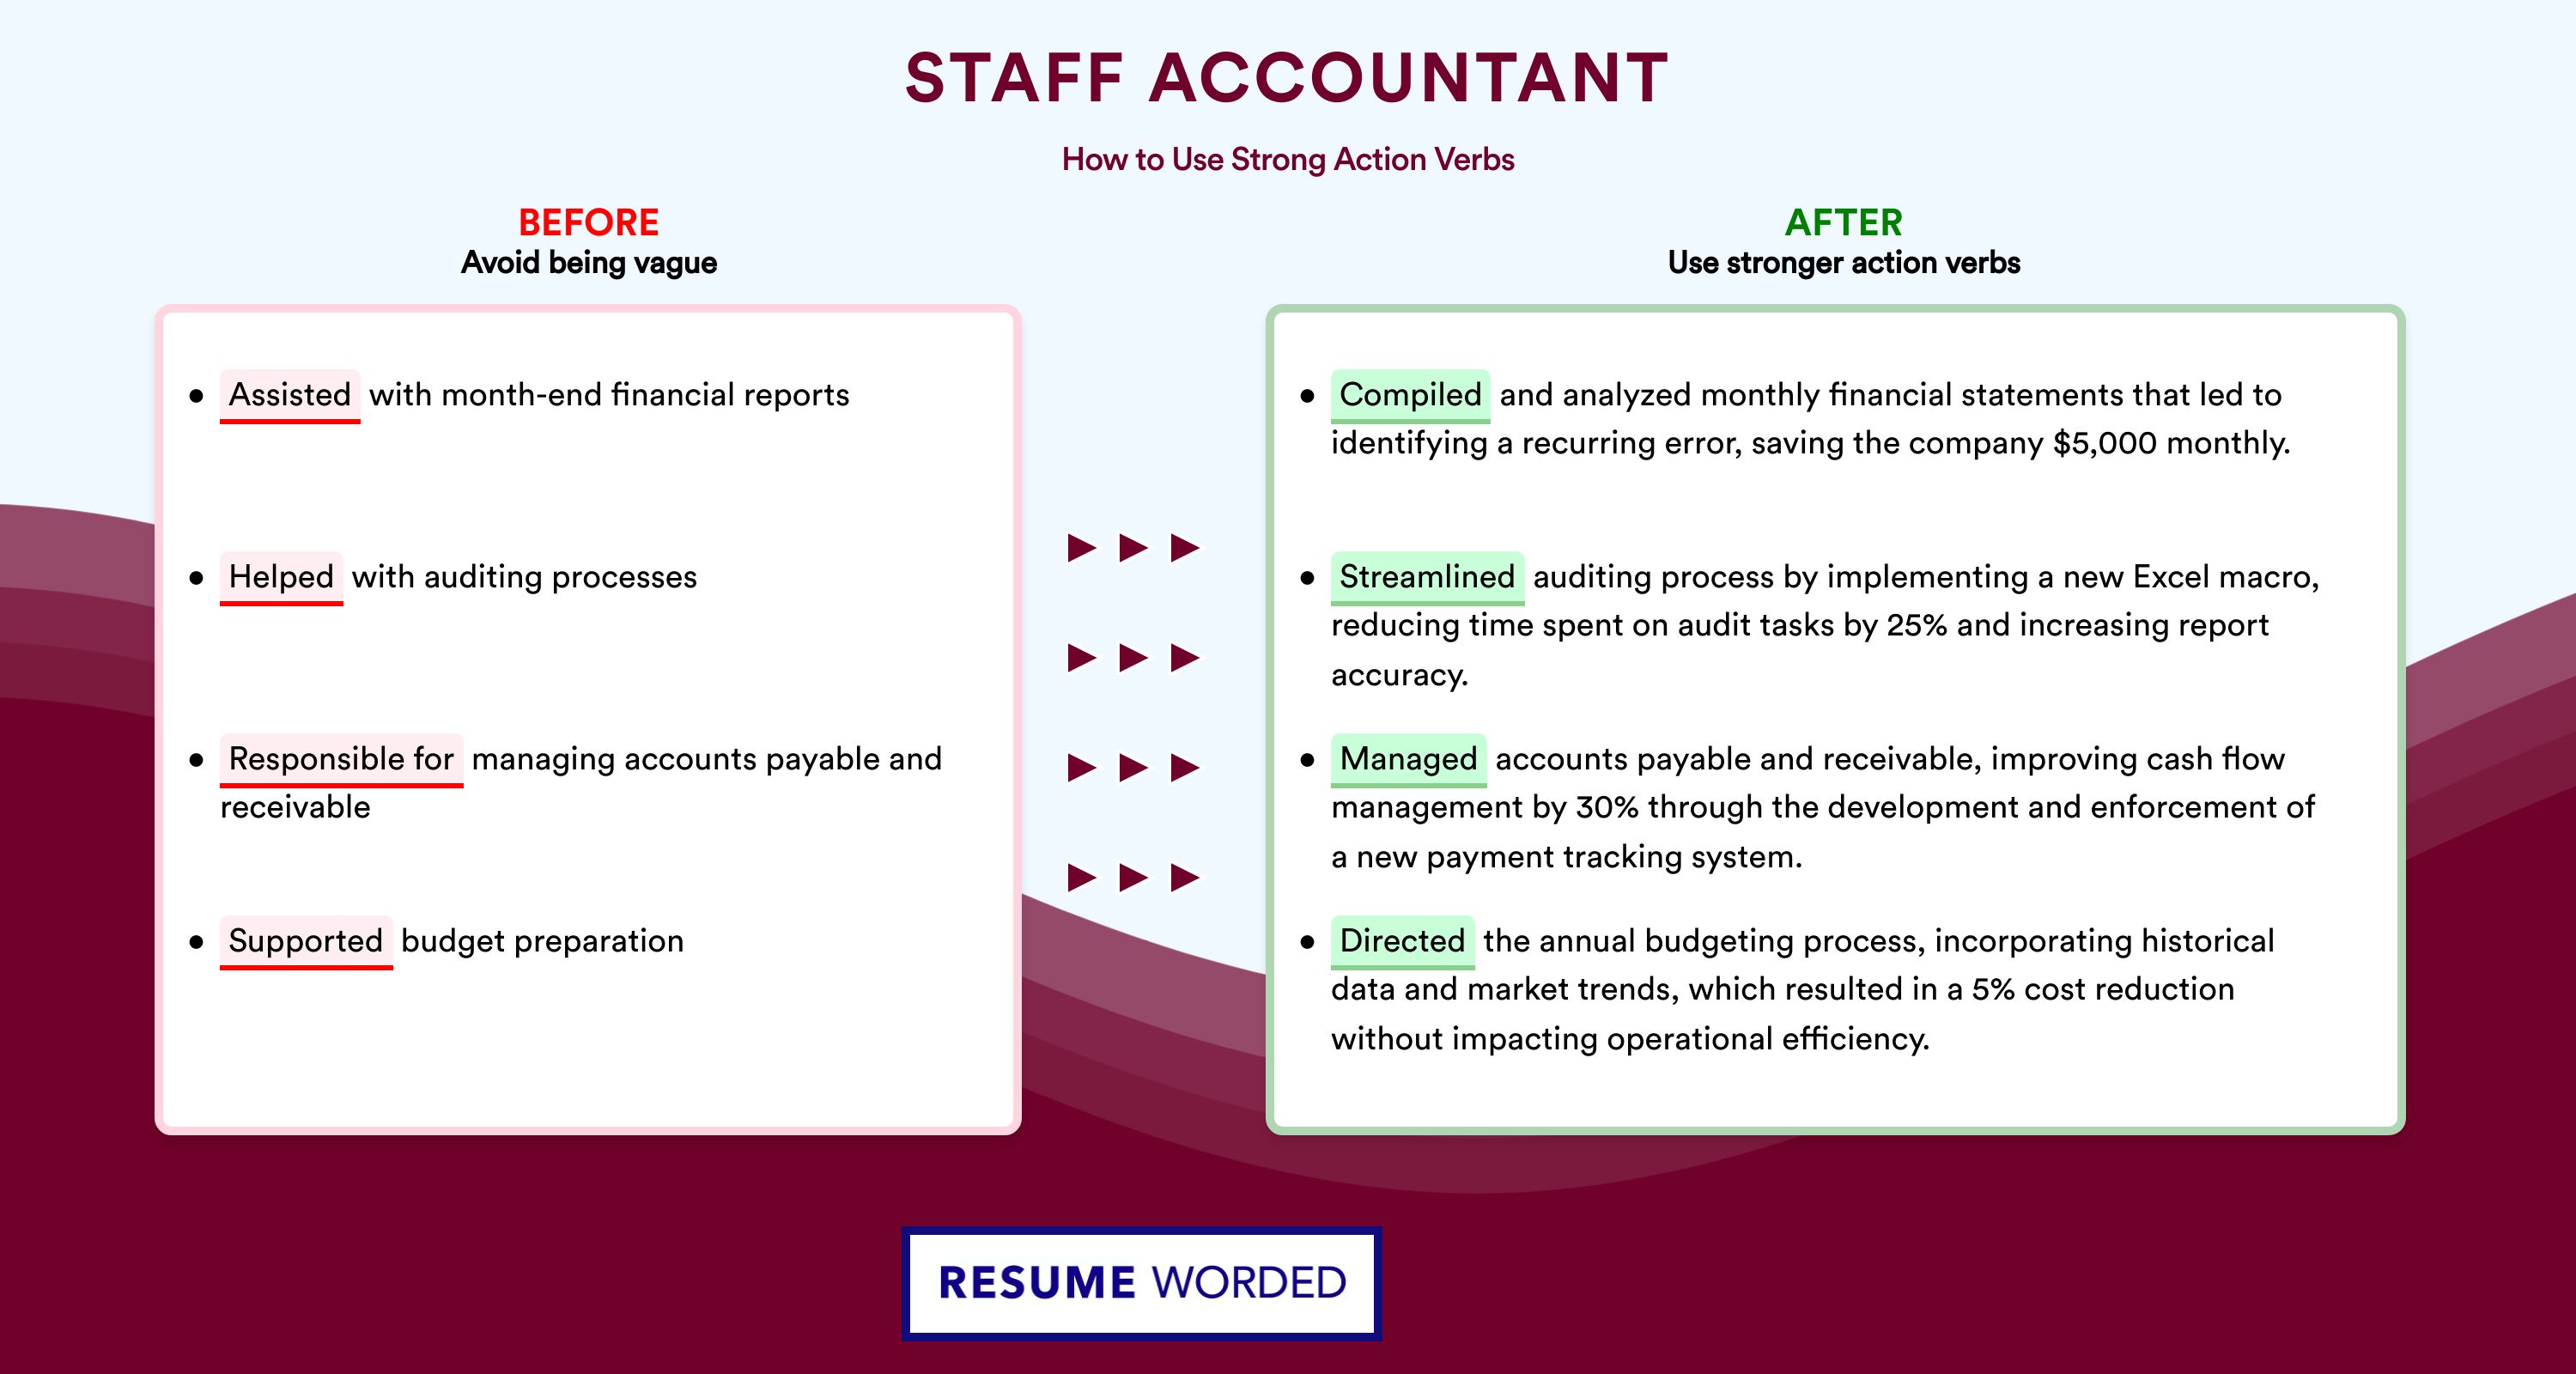 Action Verbs for Staff Accountant